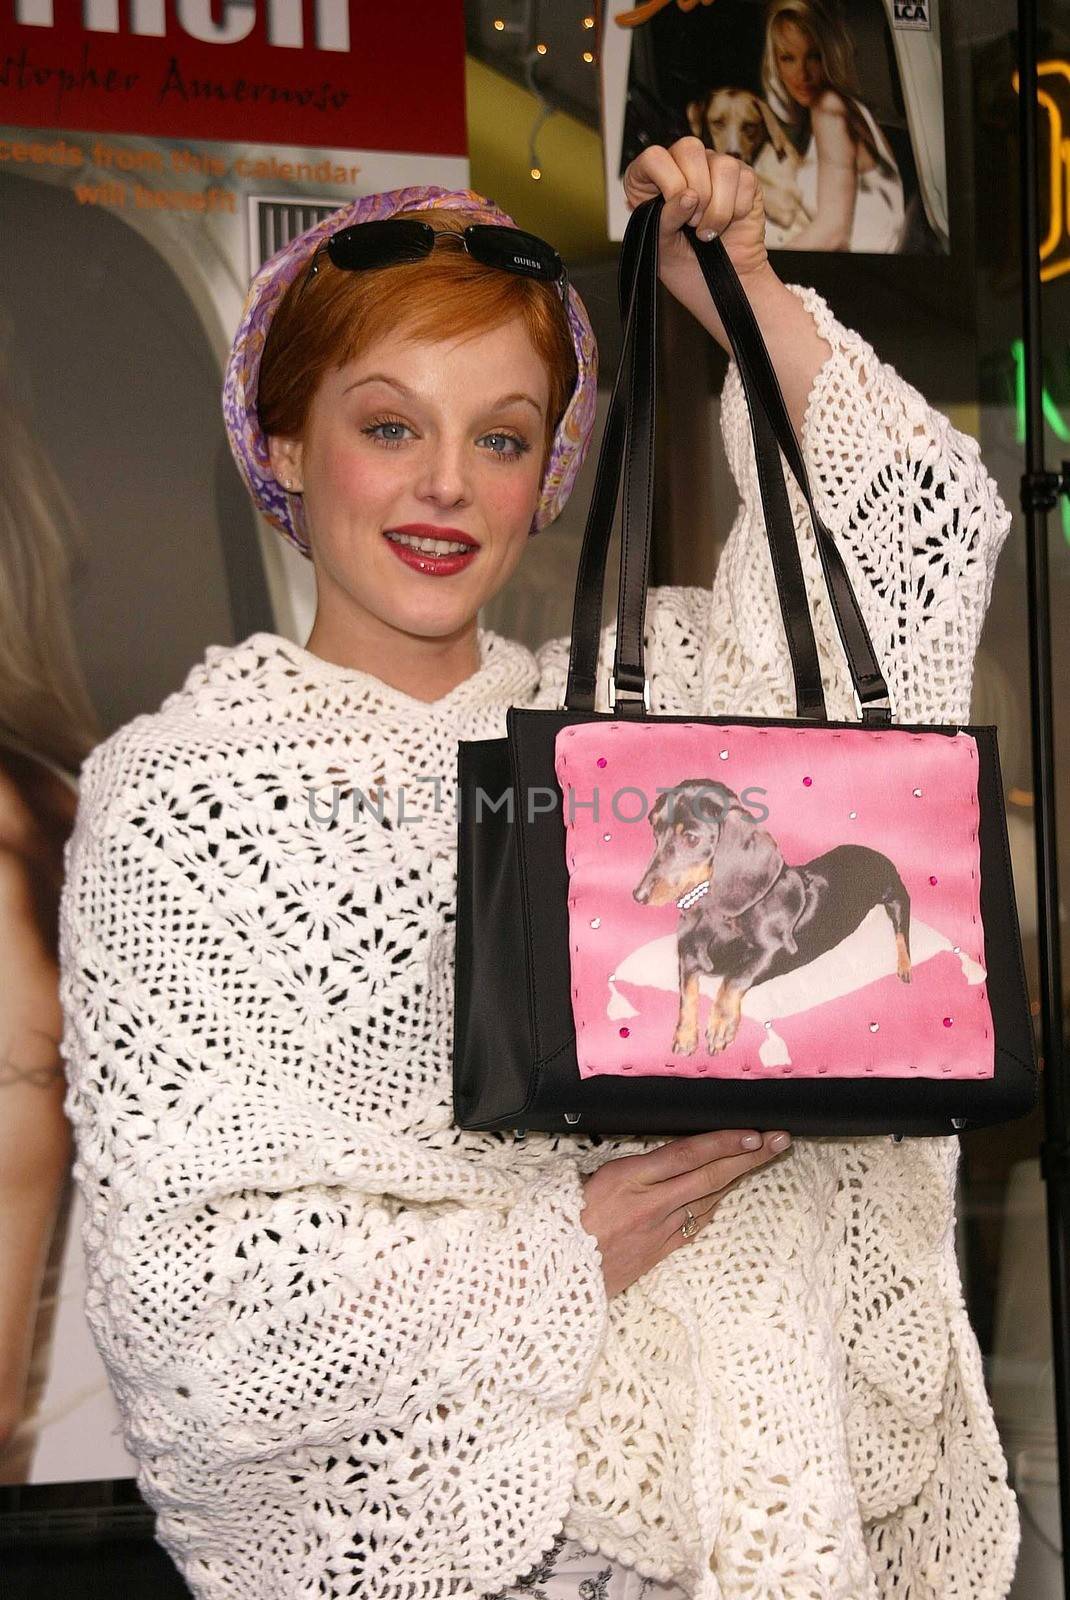 Last Chance for Animals "Pets & Celebrities" Launch by ImageCollect